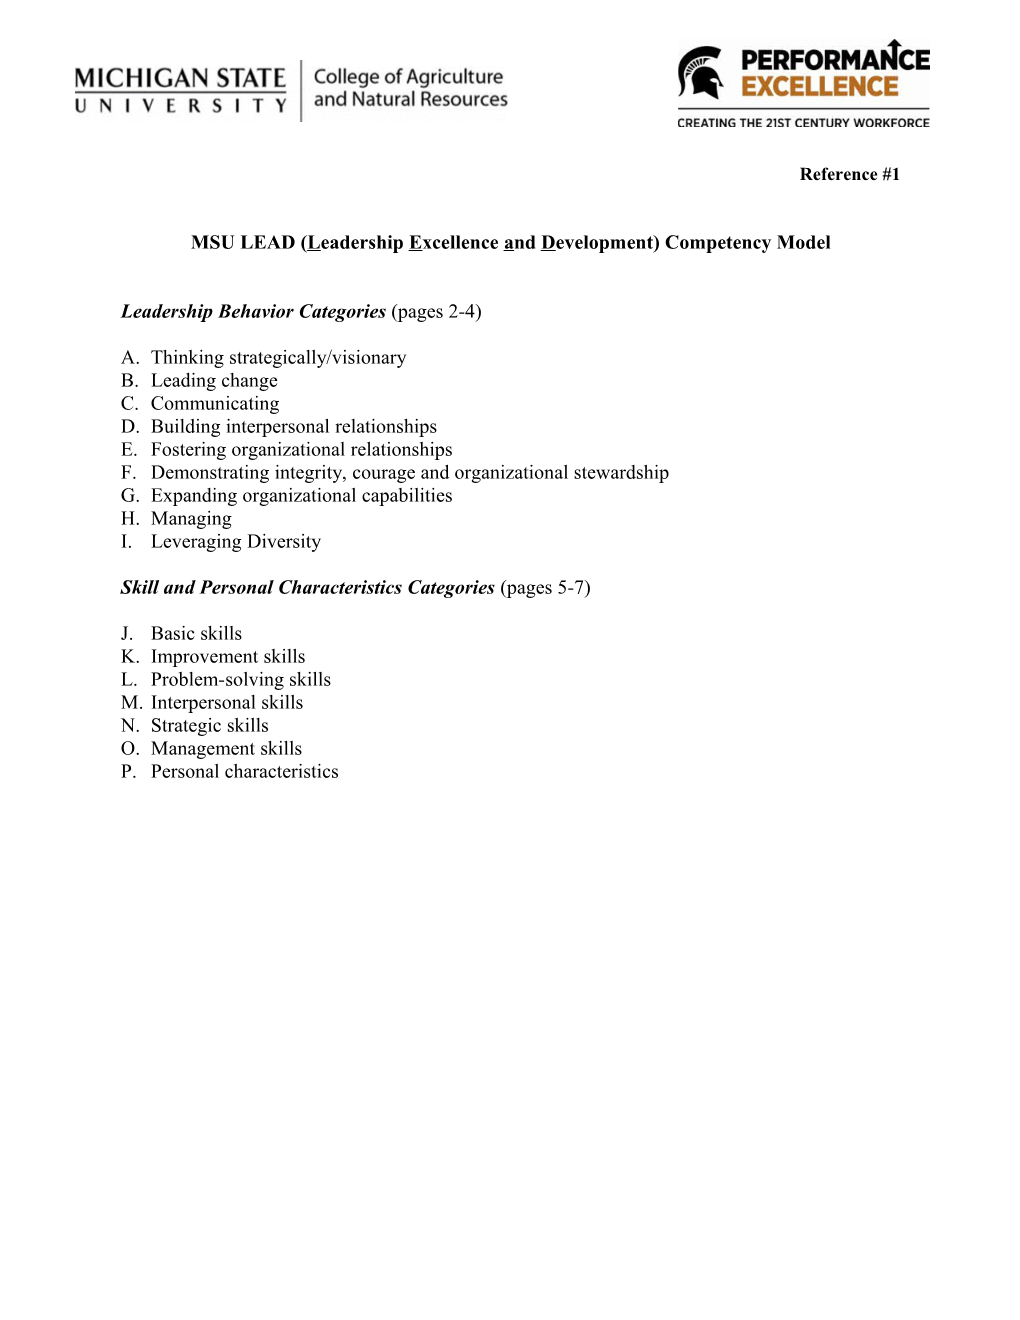 MSU LEAD (Leadership Excellence and Development) Competency Model